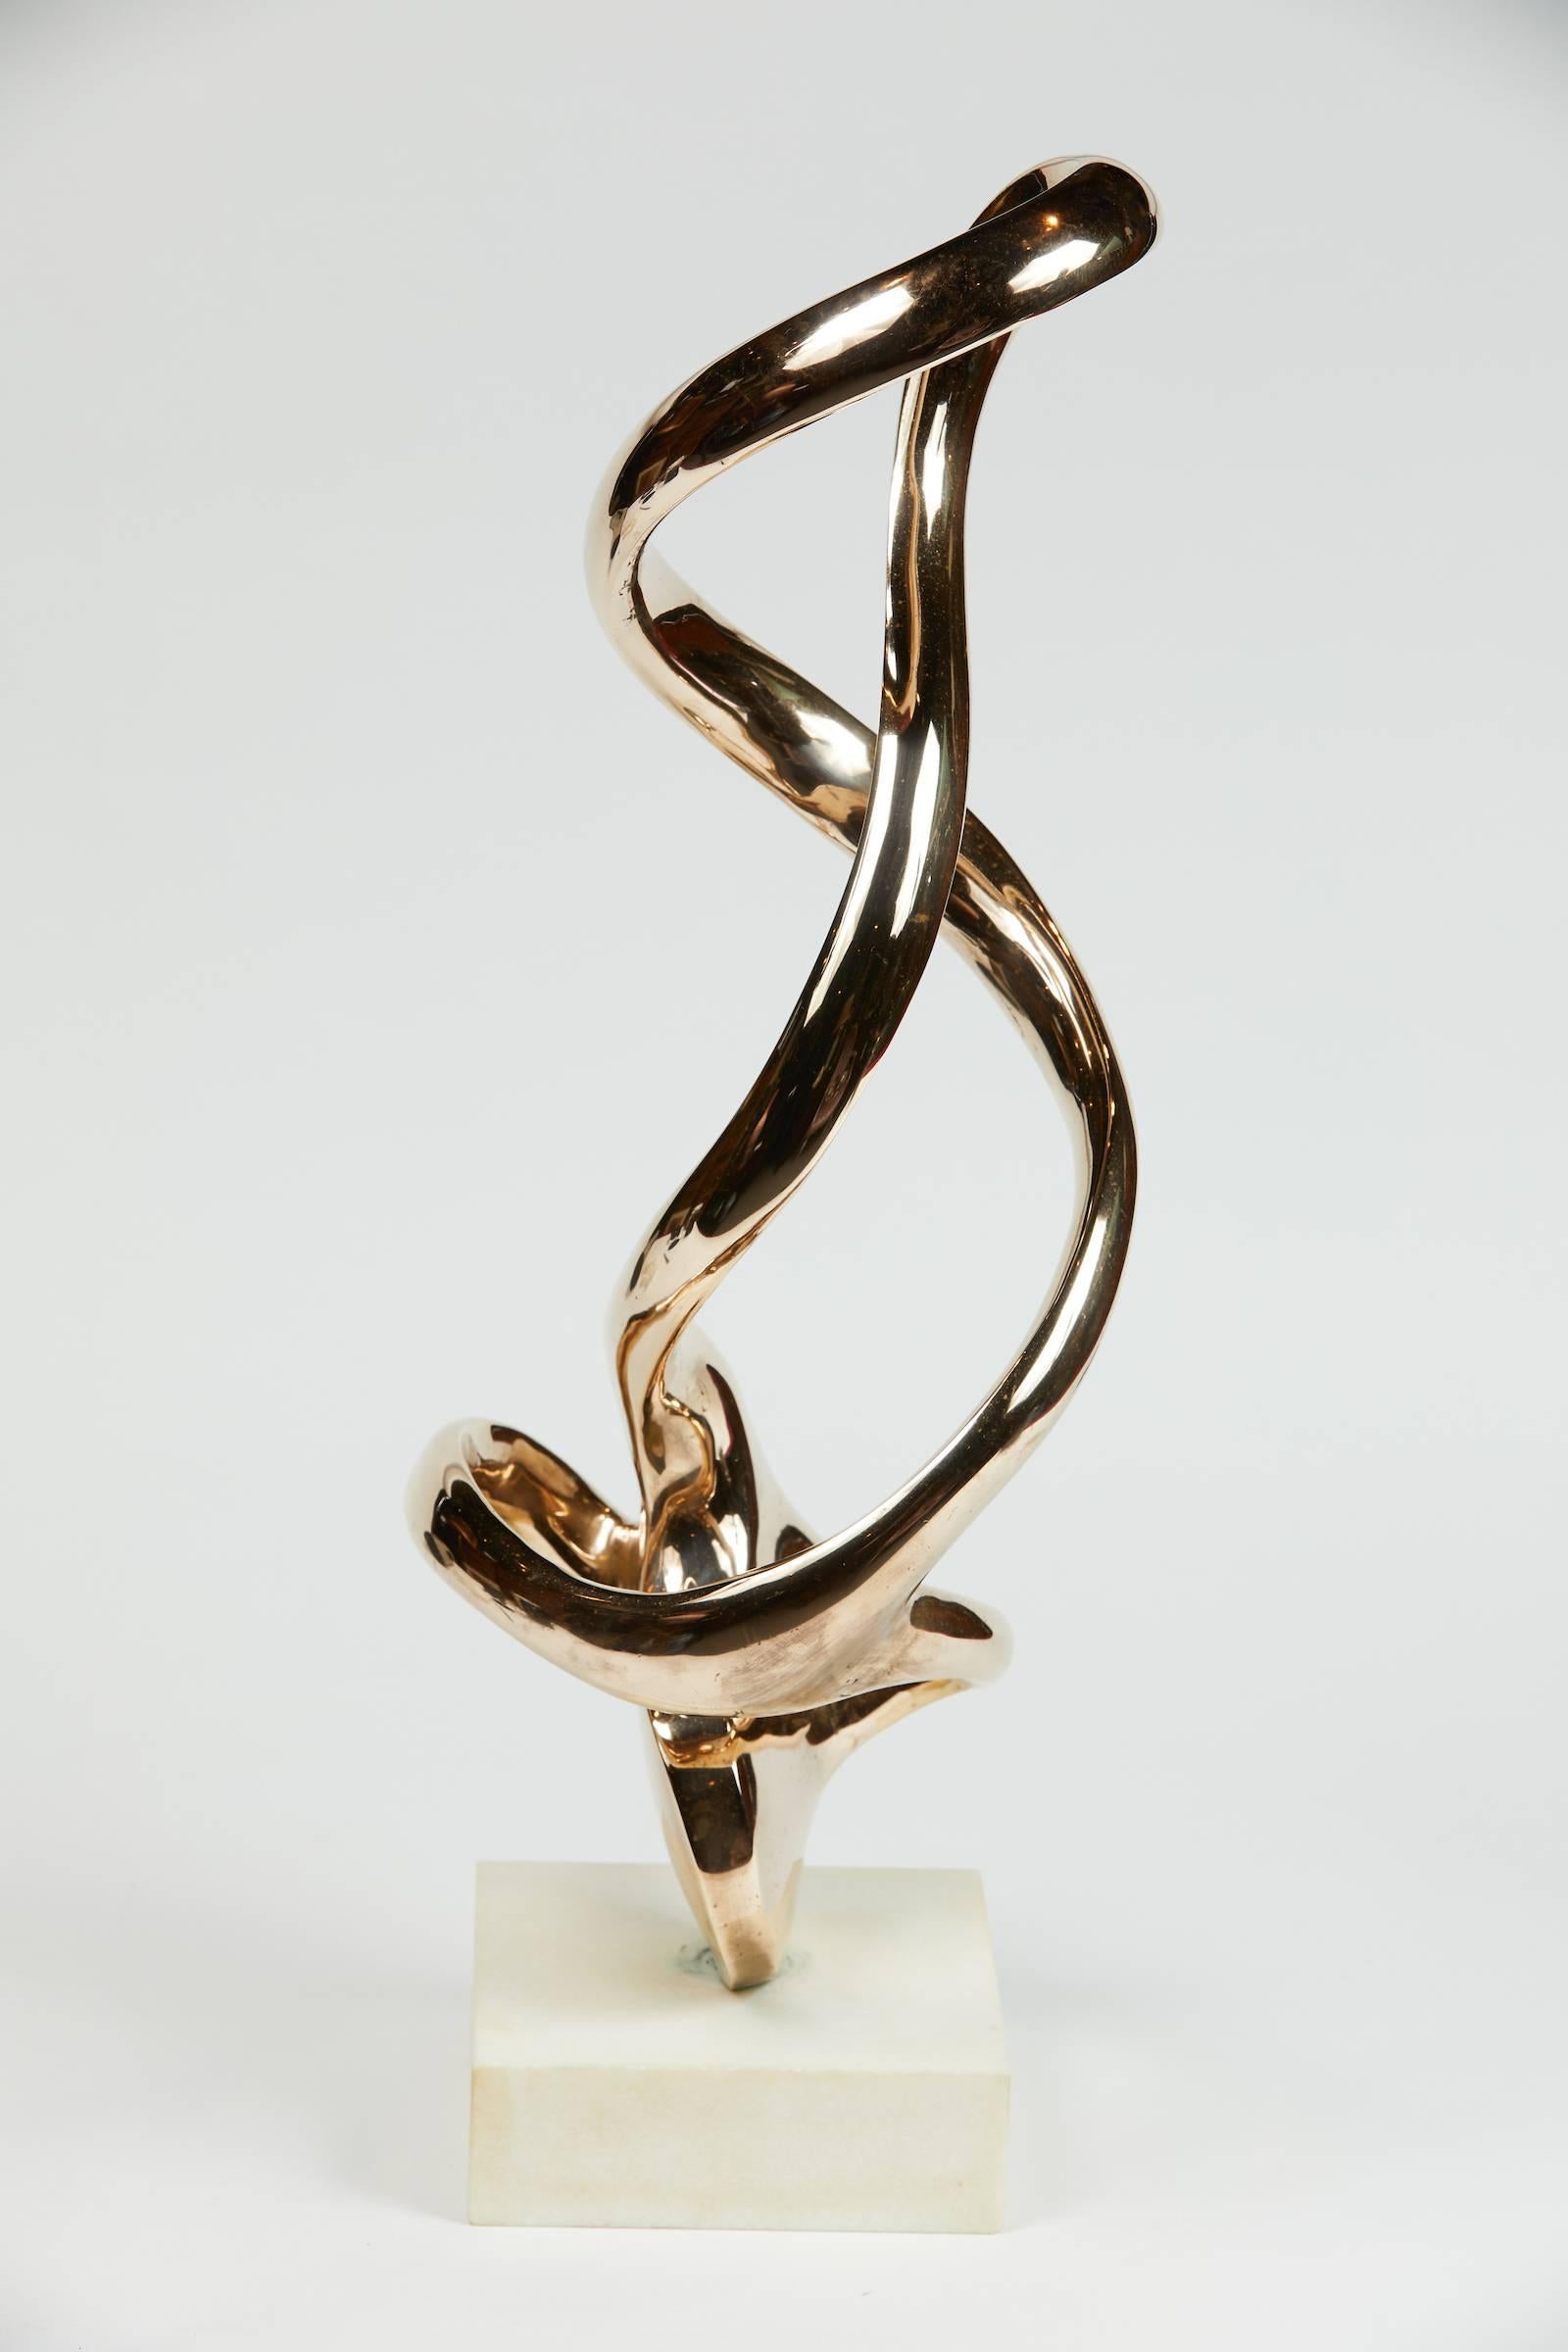 Canadian Abstract Polished Bronze Sculpture by Kieff